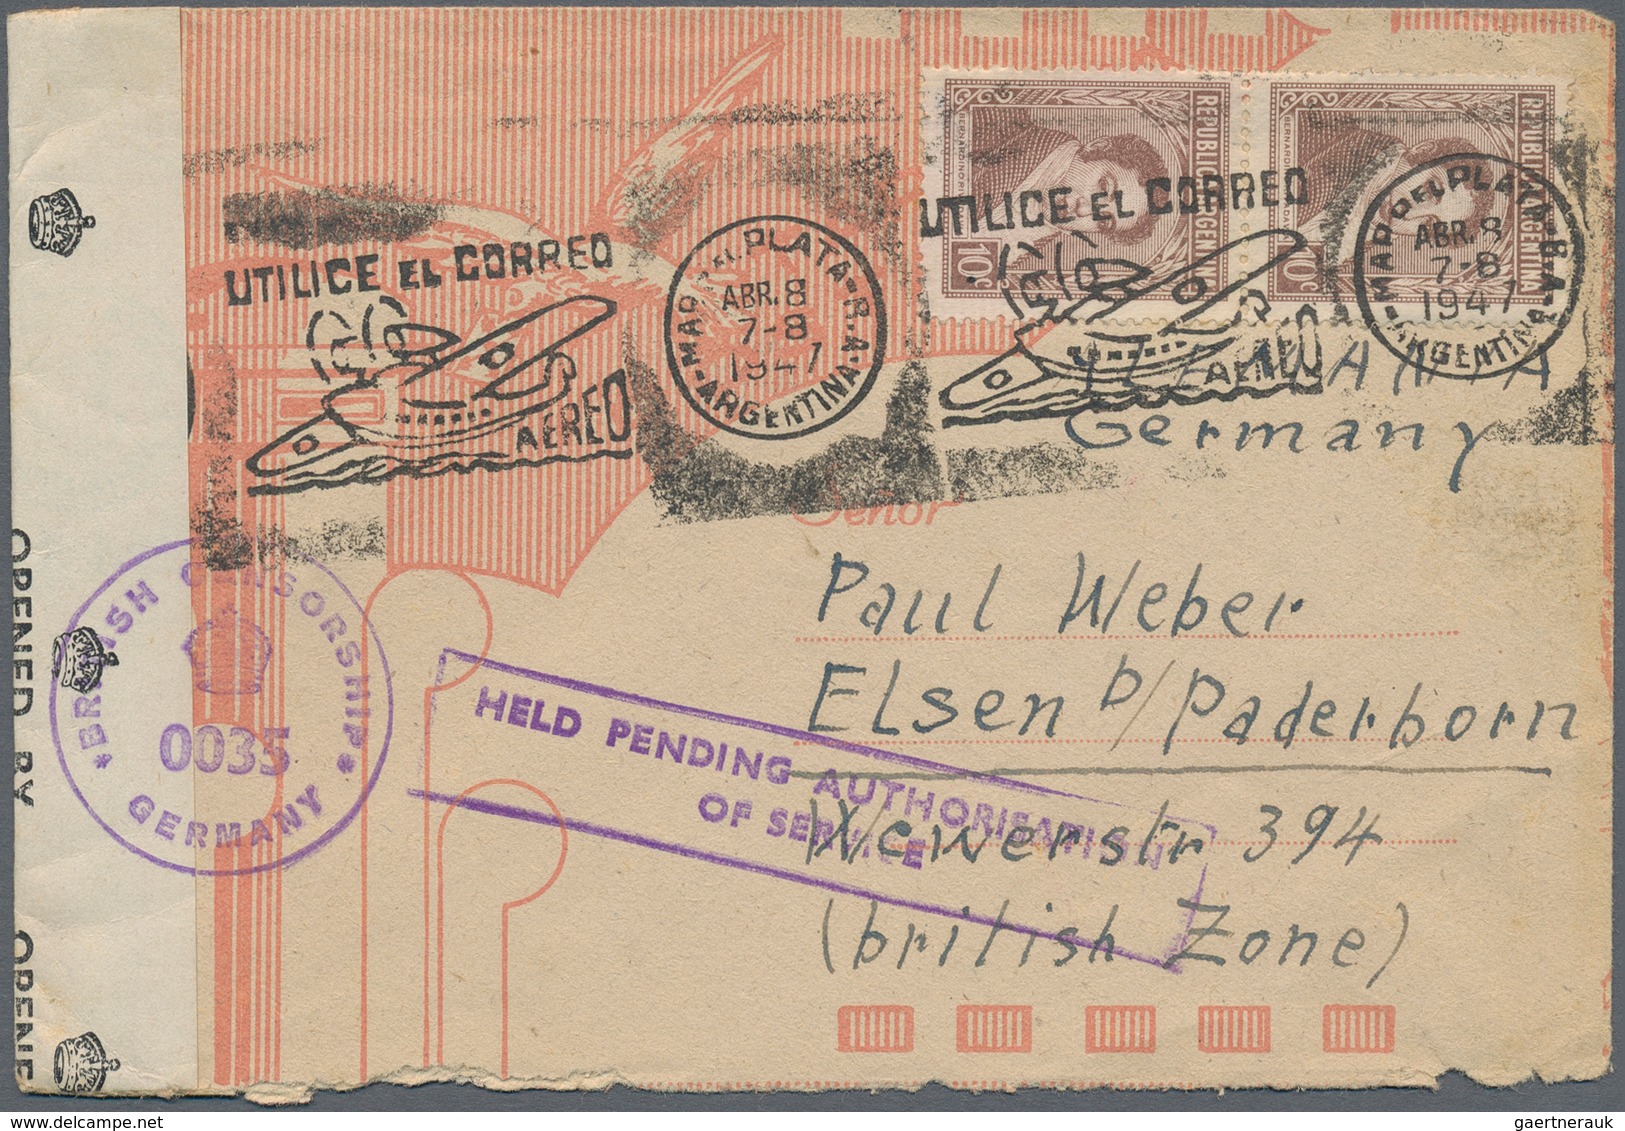 Argentinien: 1904/77 (ca.), apprx. 80 covers mostly airmails to Switzerland and some to other Europe